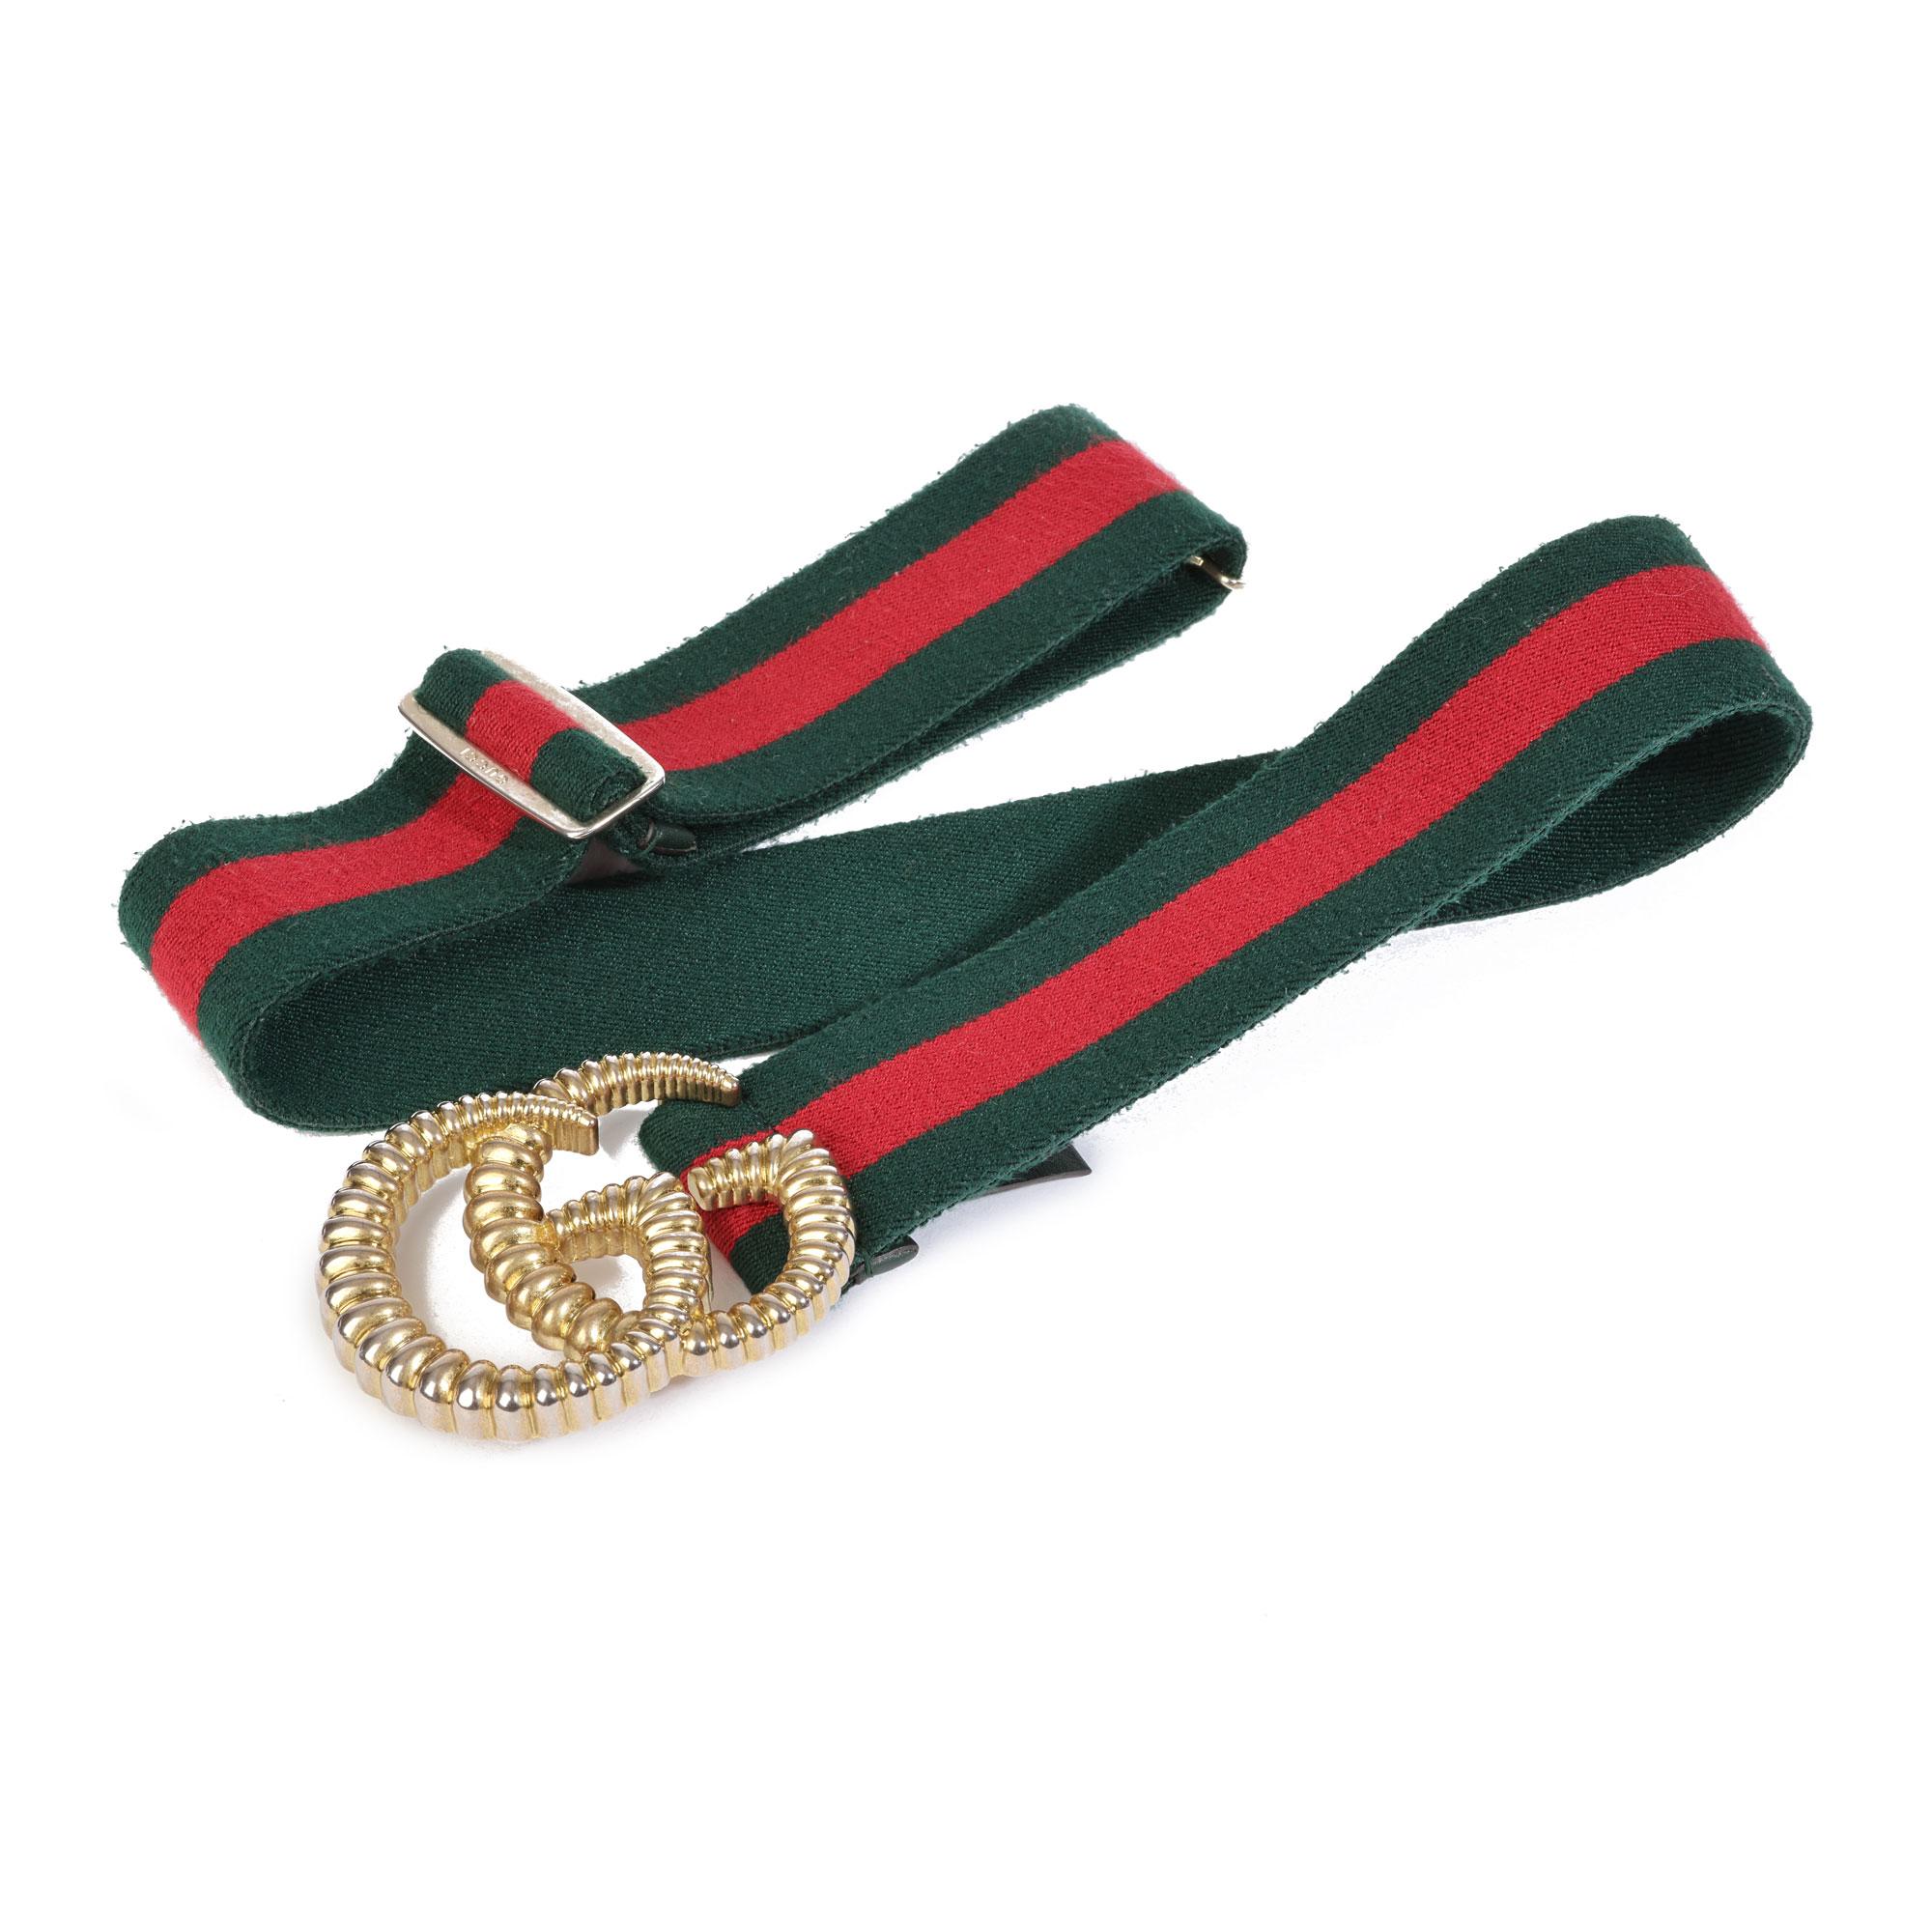 Gucci RED & GREN CANVAS WEB TORCON DOUBLE G BELT

CONDITION NOTES
The exterior is in very good condition with minimal signs of use.
The hardware is in good condition with light signs of use. The Hardware shows signs of tarnishing on close